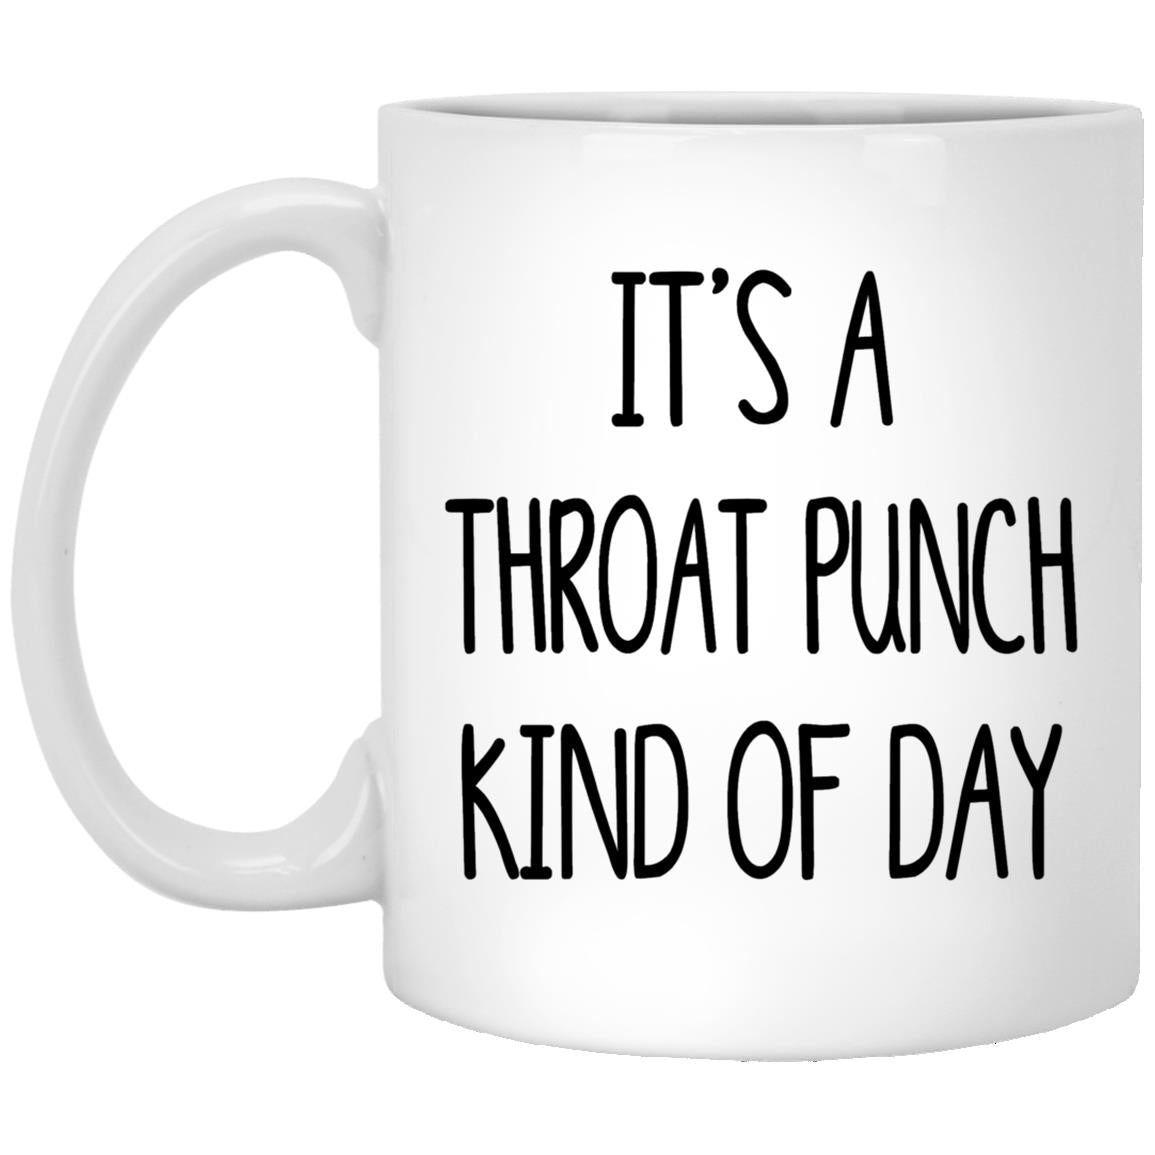 It's A Throat Punch Kind of Day Mug